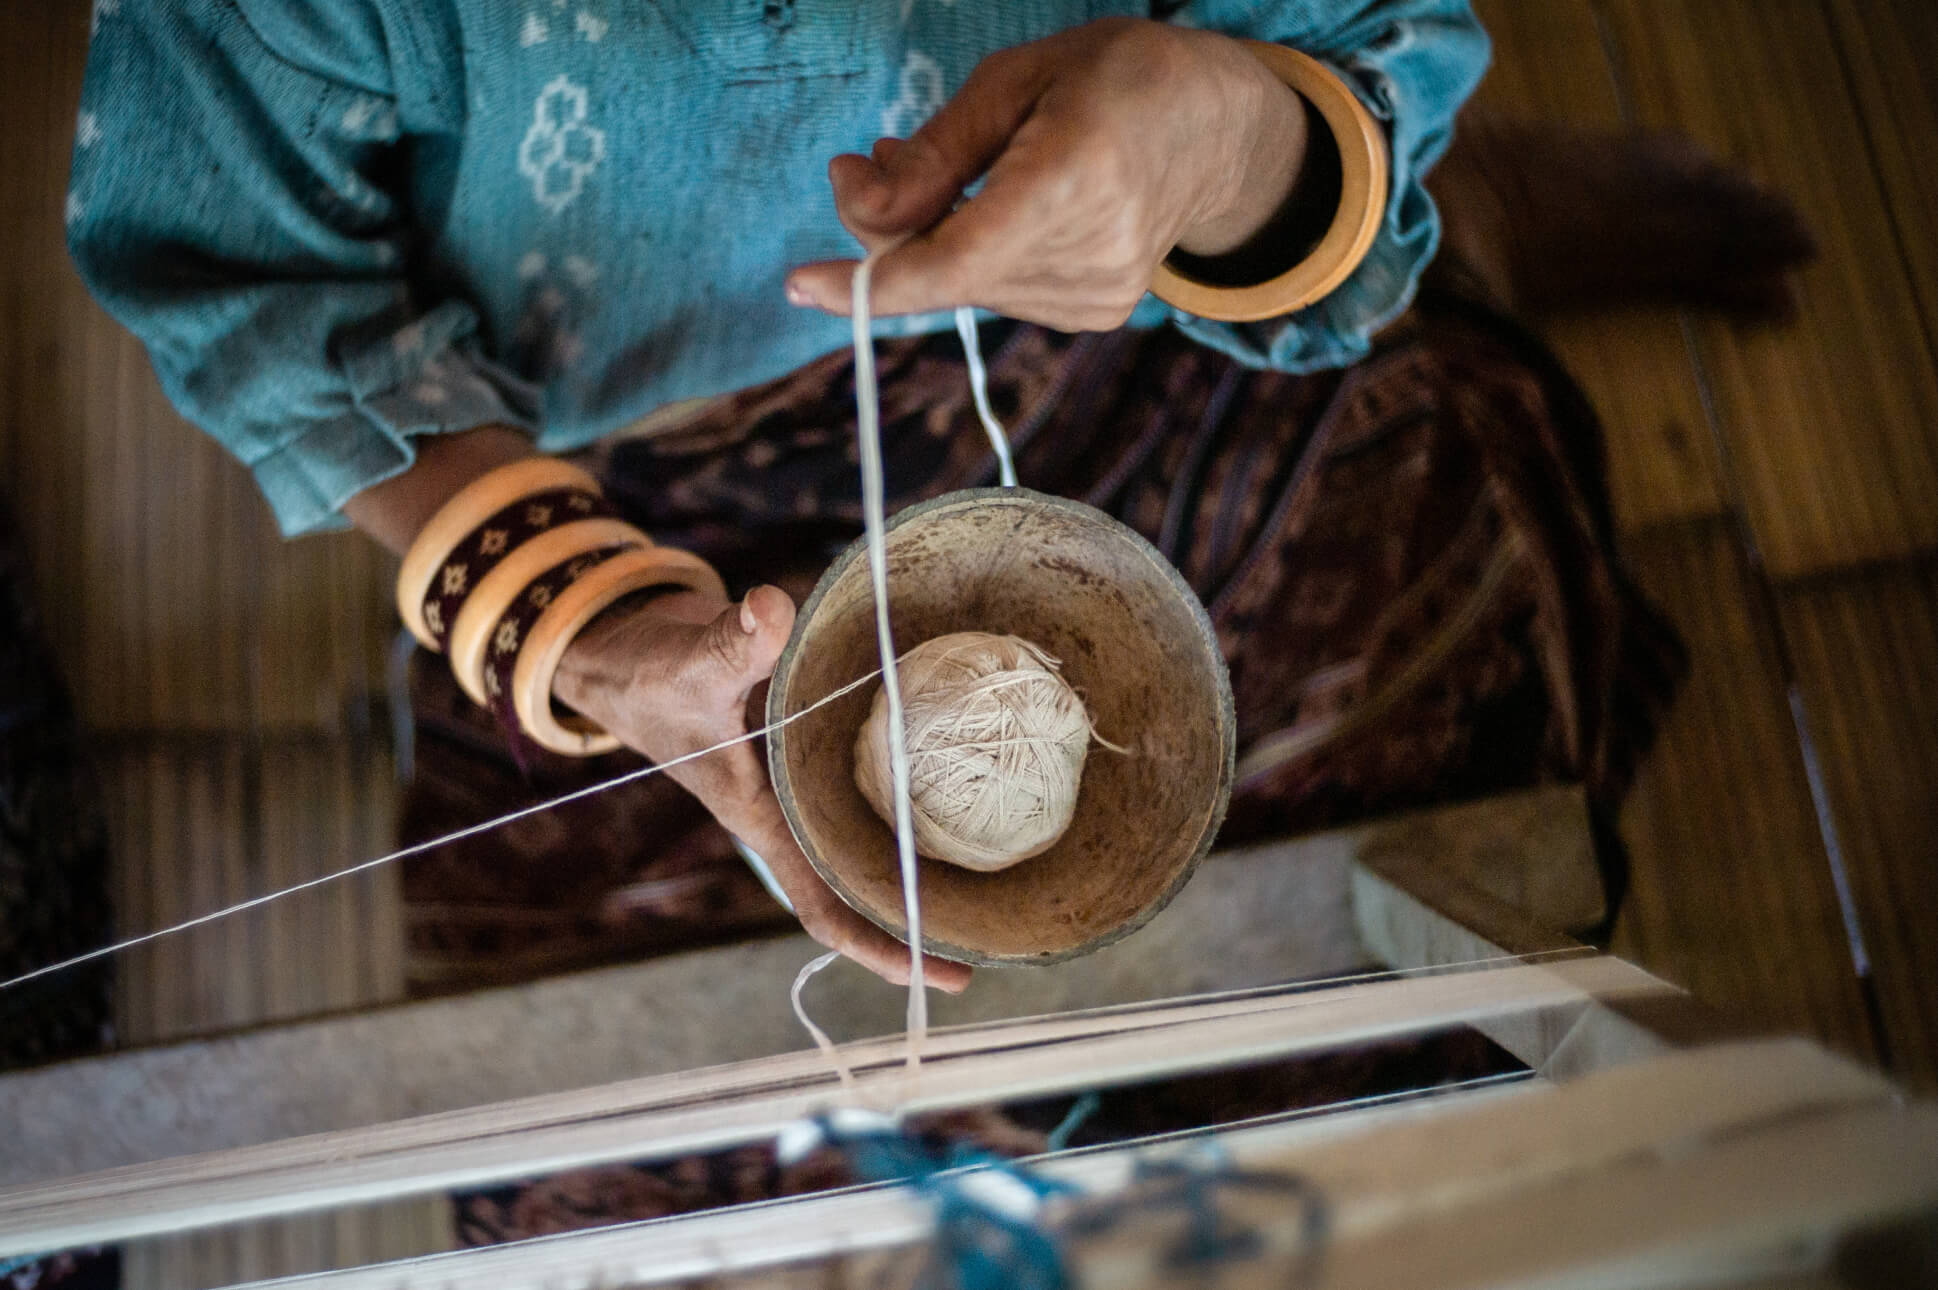 Top down shot of a woman holding a bowl with a ball of thread